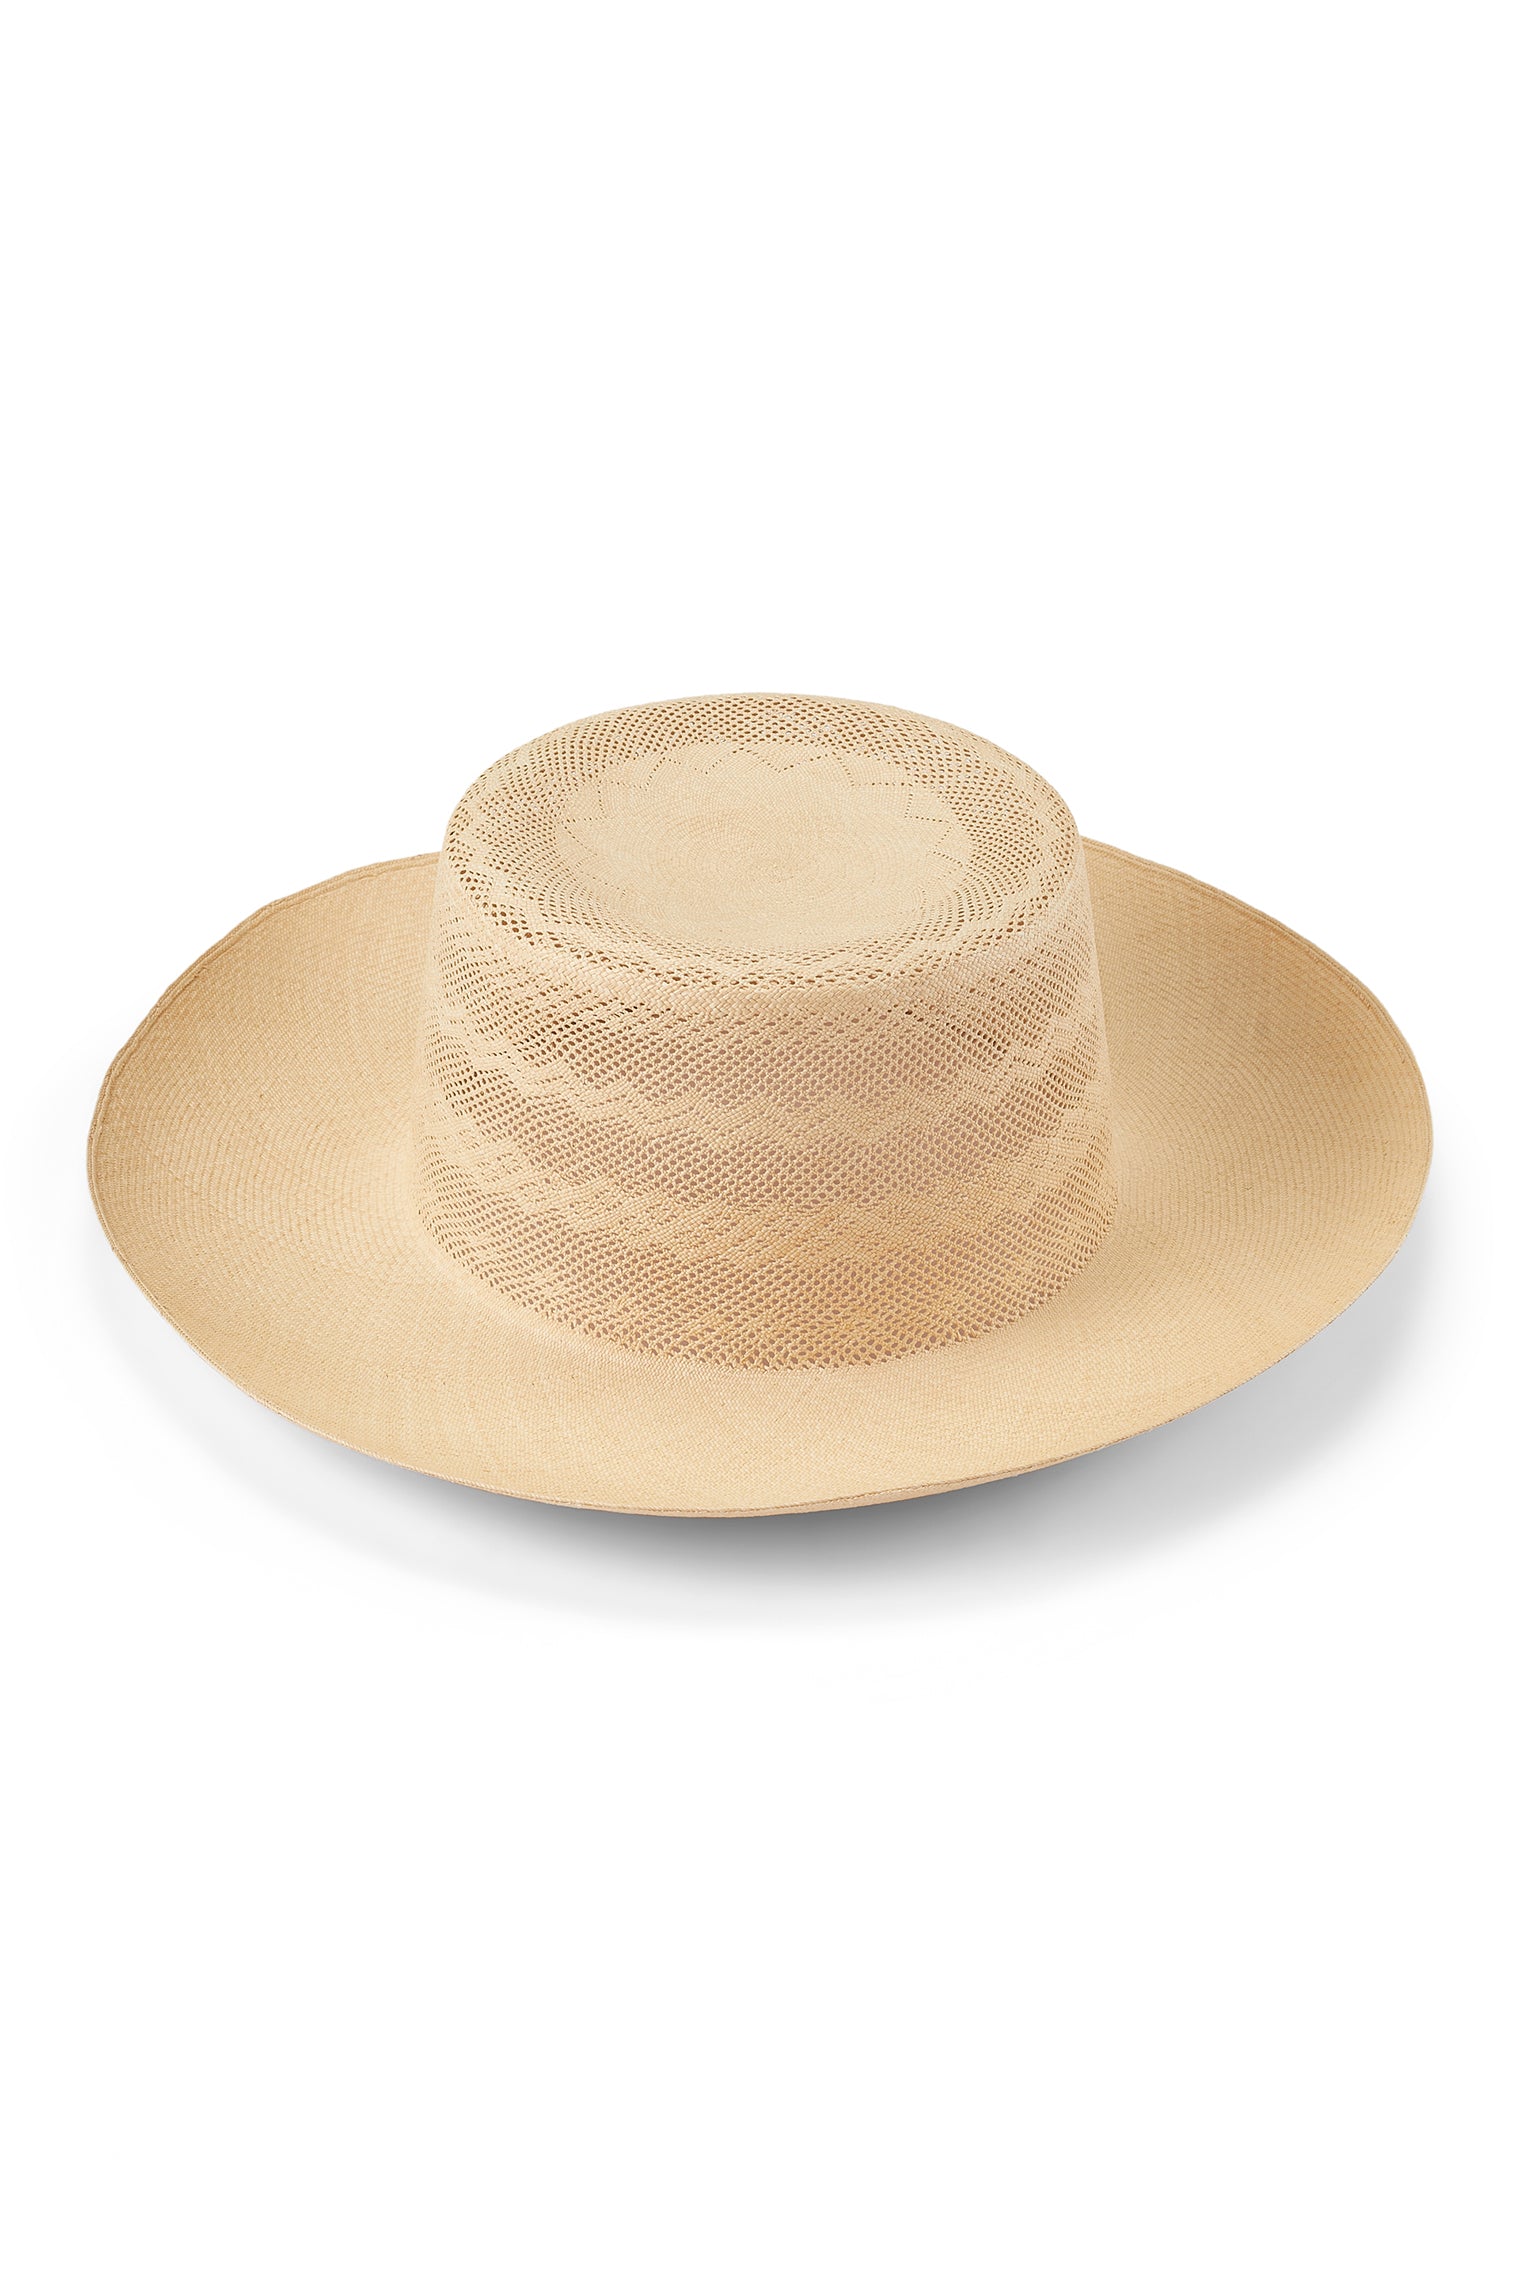 Alice Woven Panama - The Bespoke Embroidered Panama Hat Collection - Lock & Co. Hatters London UK